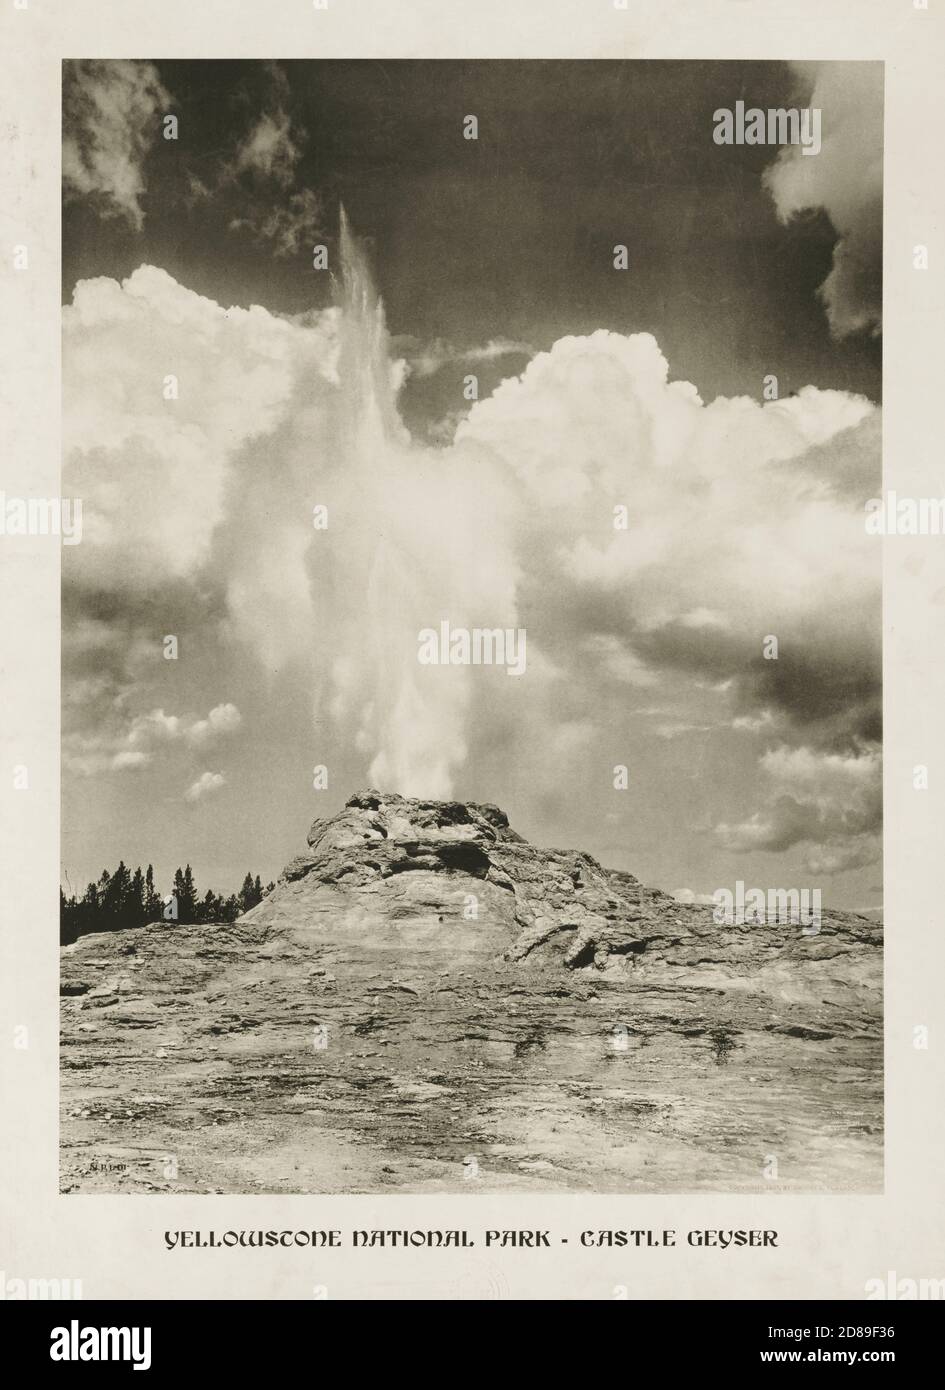 Parc national de Yellowstone Château Geyser, Wyoming 1907 Banque D'Images